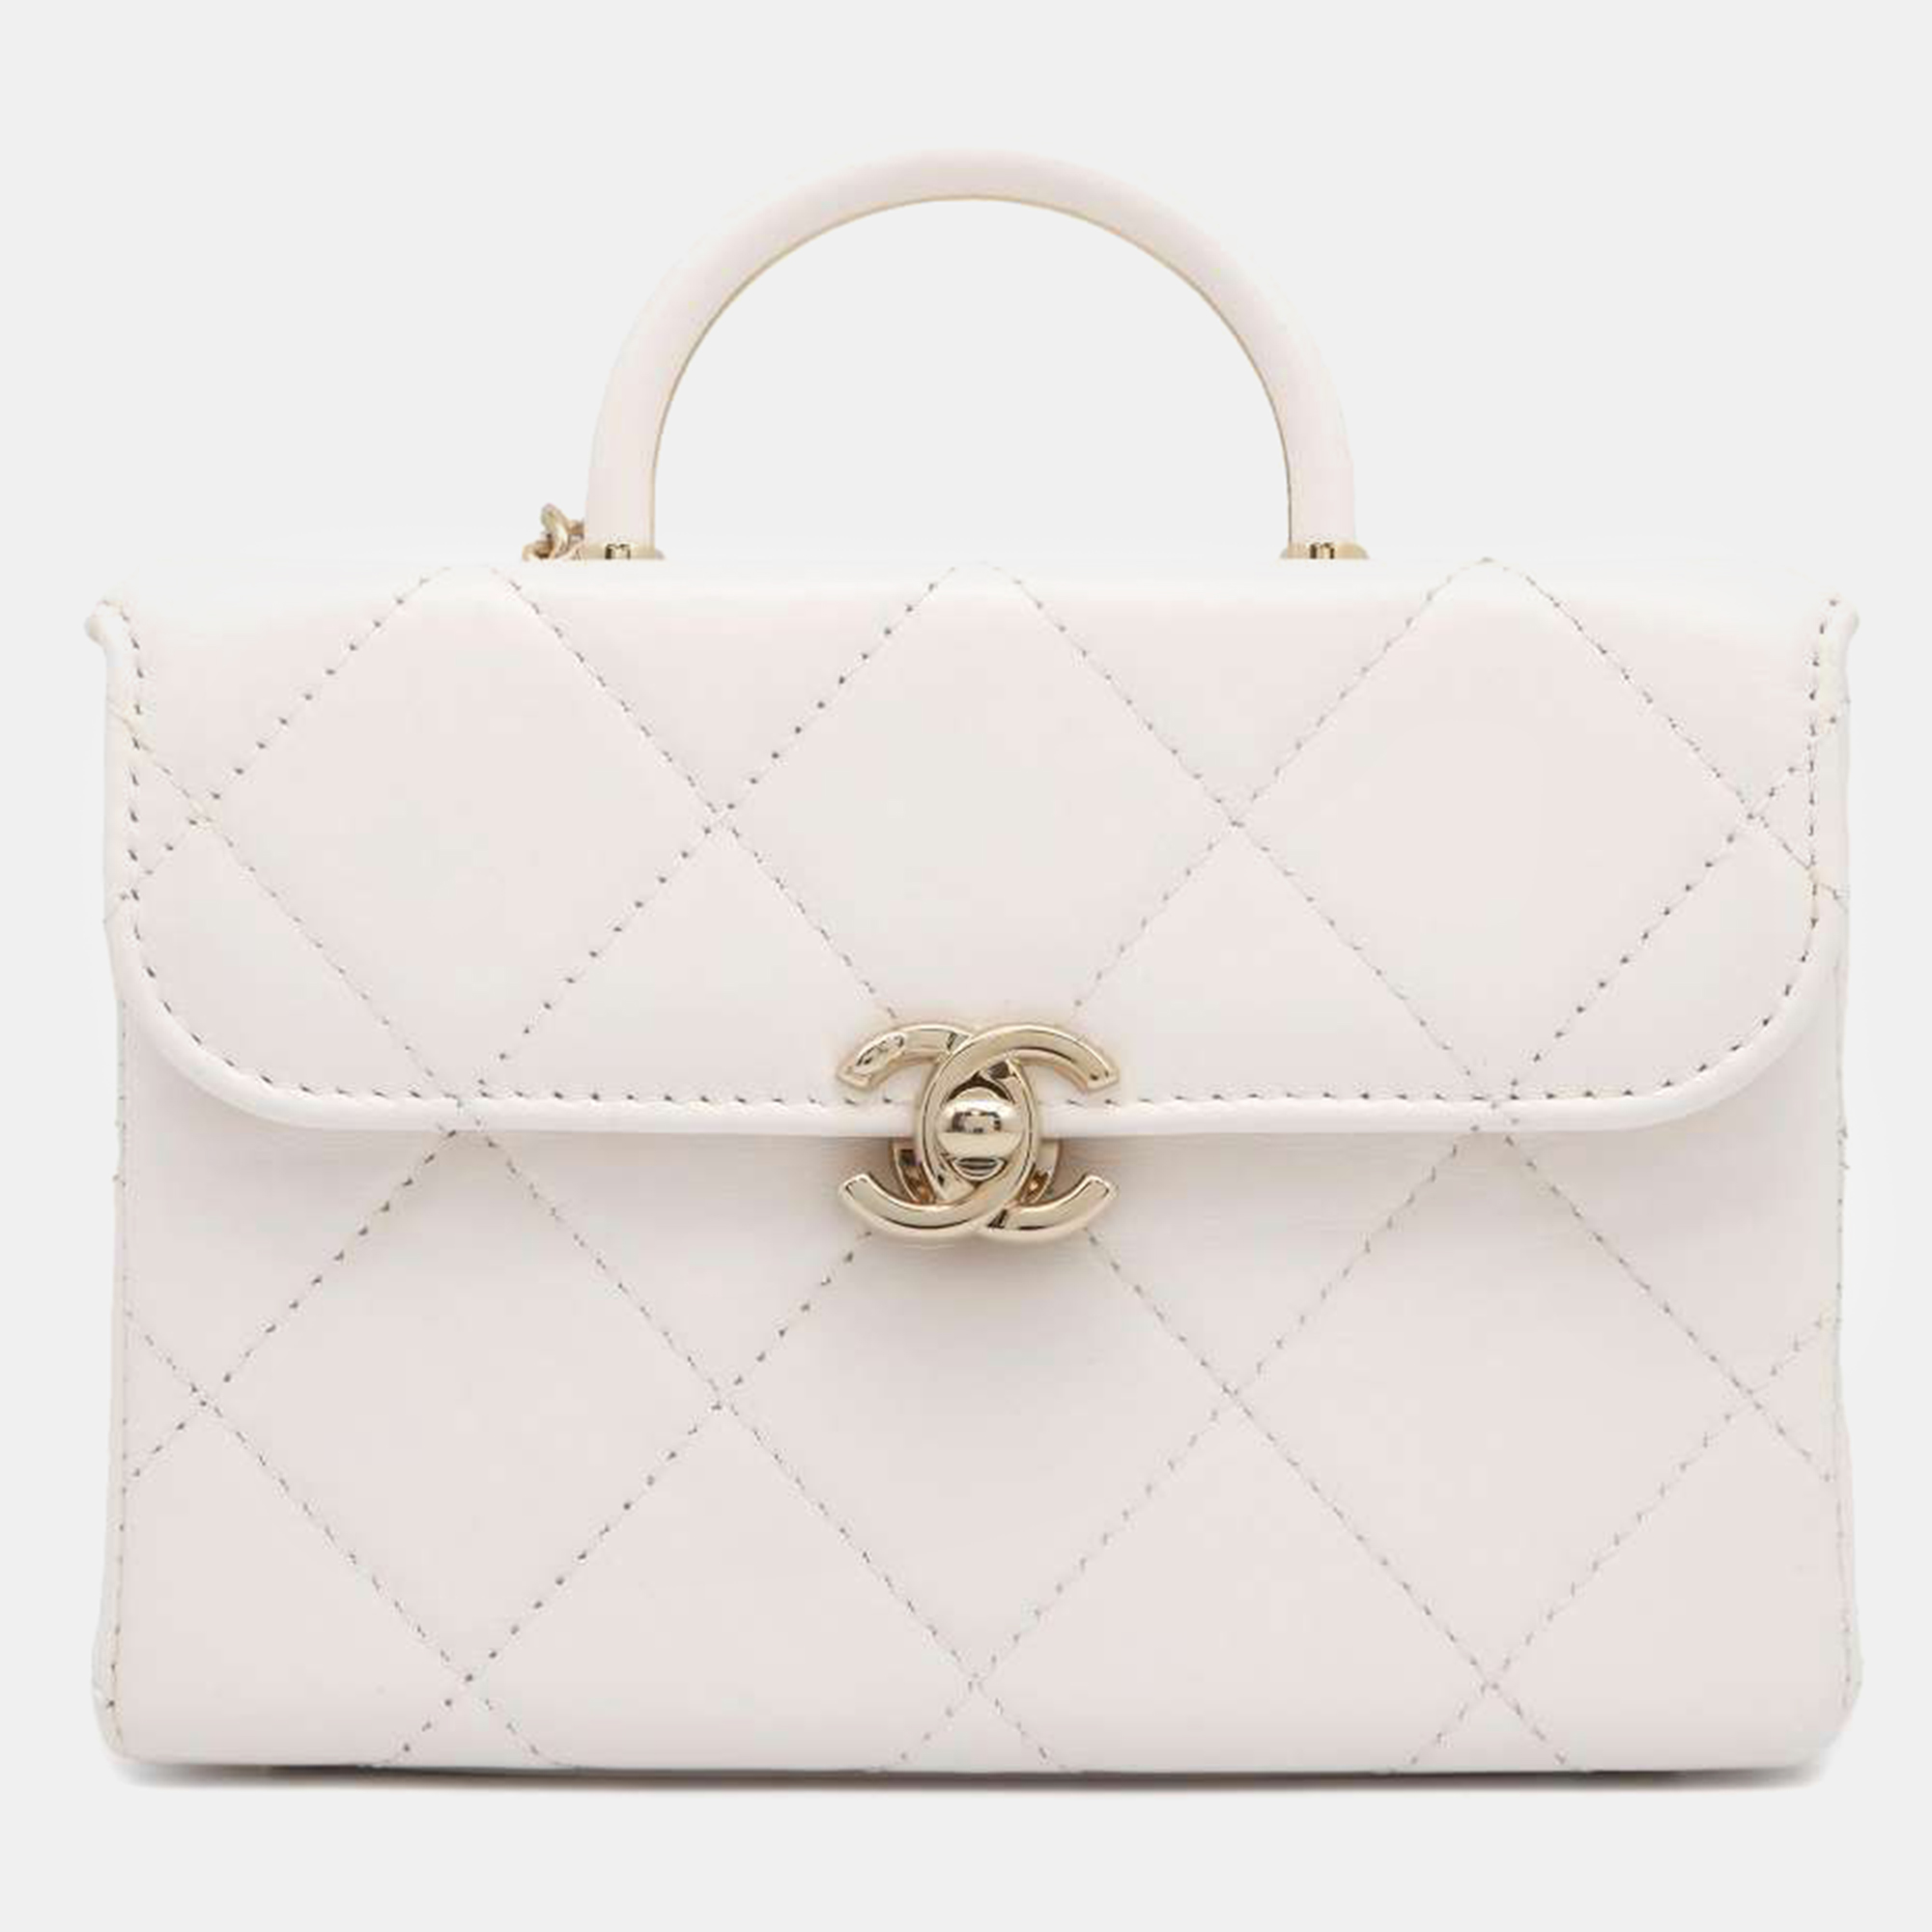 

Chanel White Leather Top handle Flap Bag